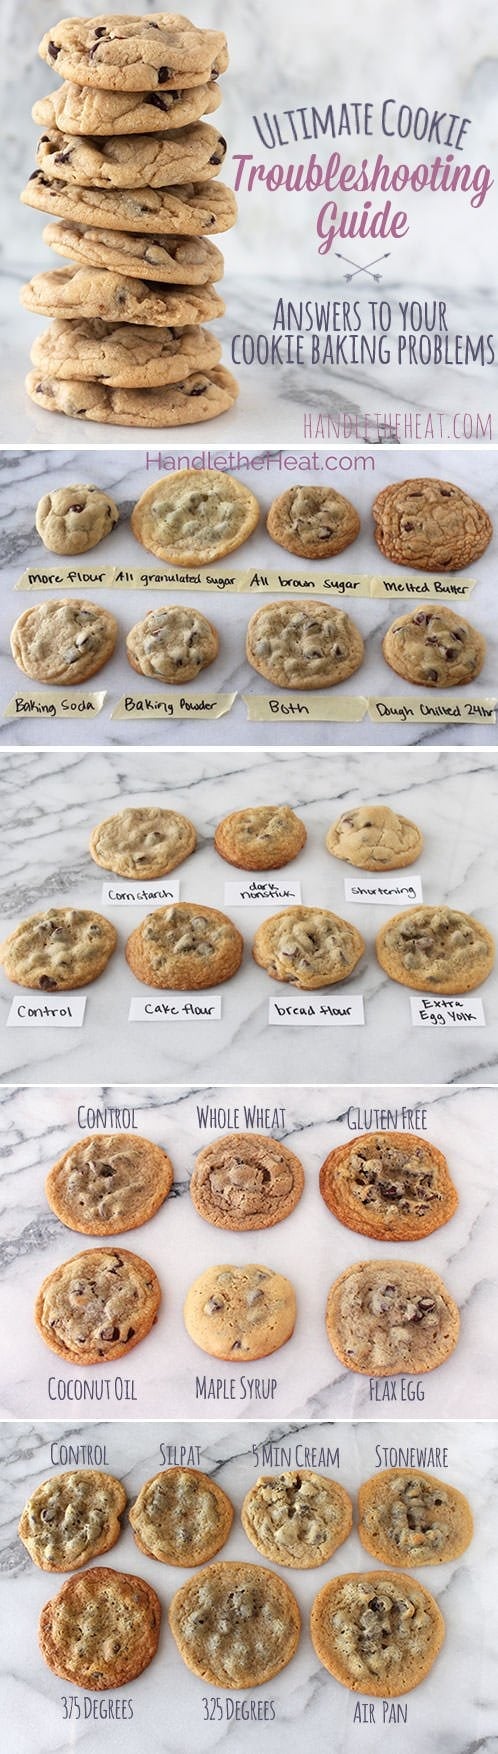 Ultimate Cookie Troubleshooting Guide to find out why your cookies are too thin, thick, crumbly, or how to make them chewy, soft, crispy, etc. Answering ALL your cookie problems!